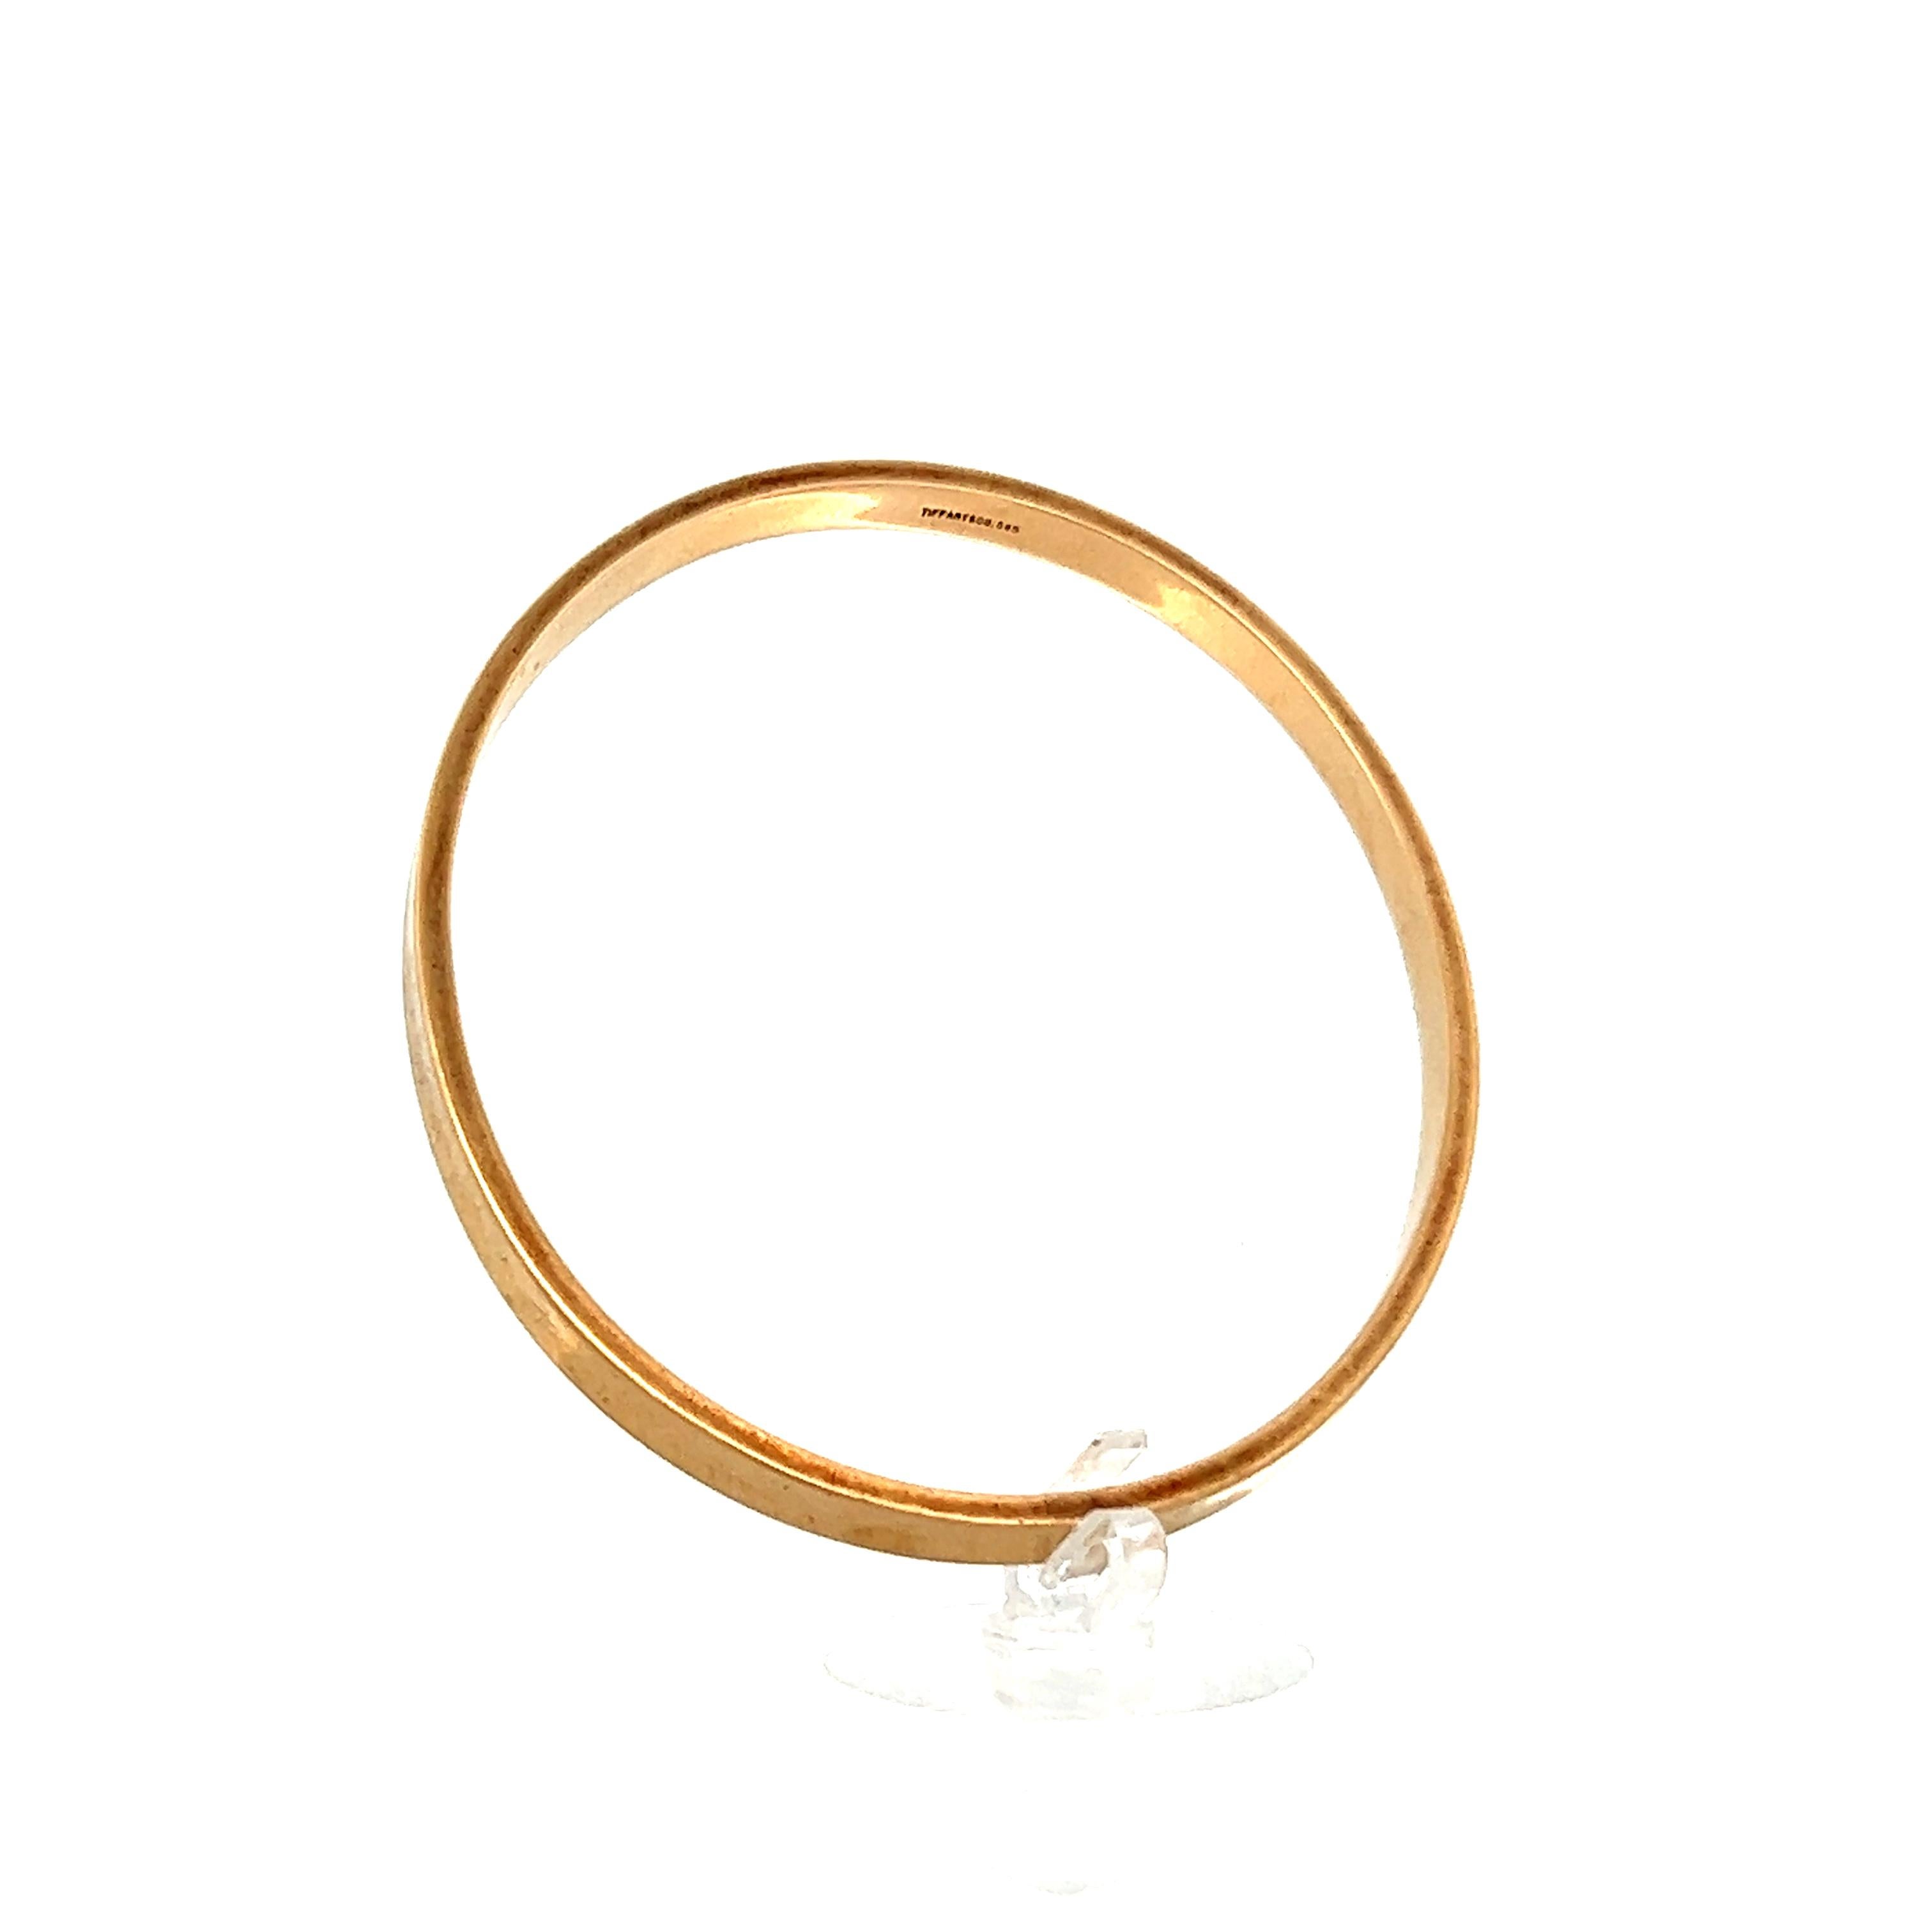 Tiffany & Co. 14k Yellow Gold Bangle Ca1960  In Excellent Condition For Sale In Lexington, KY